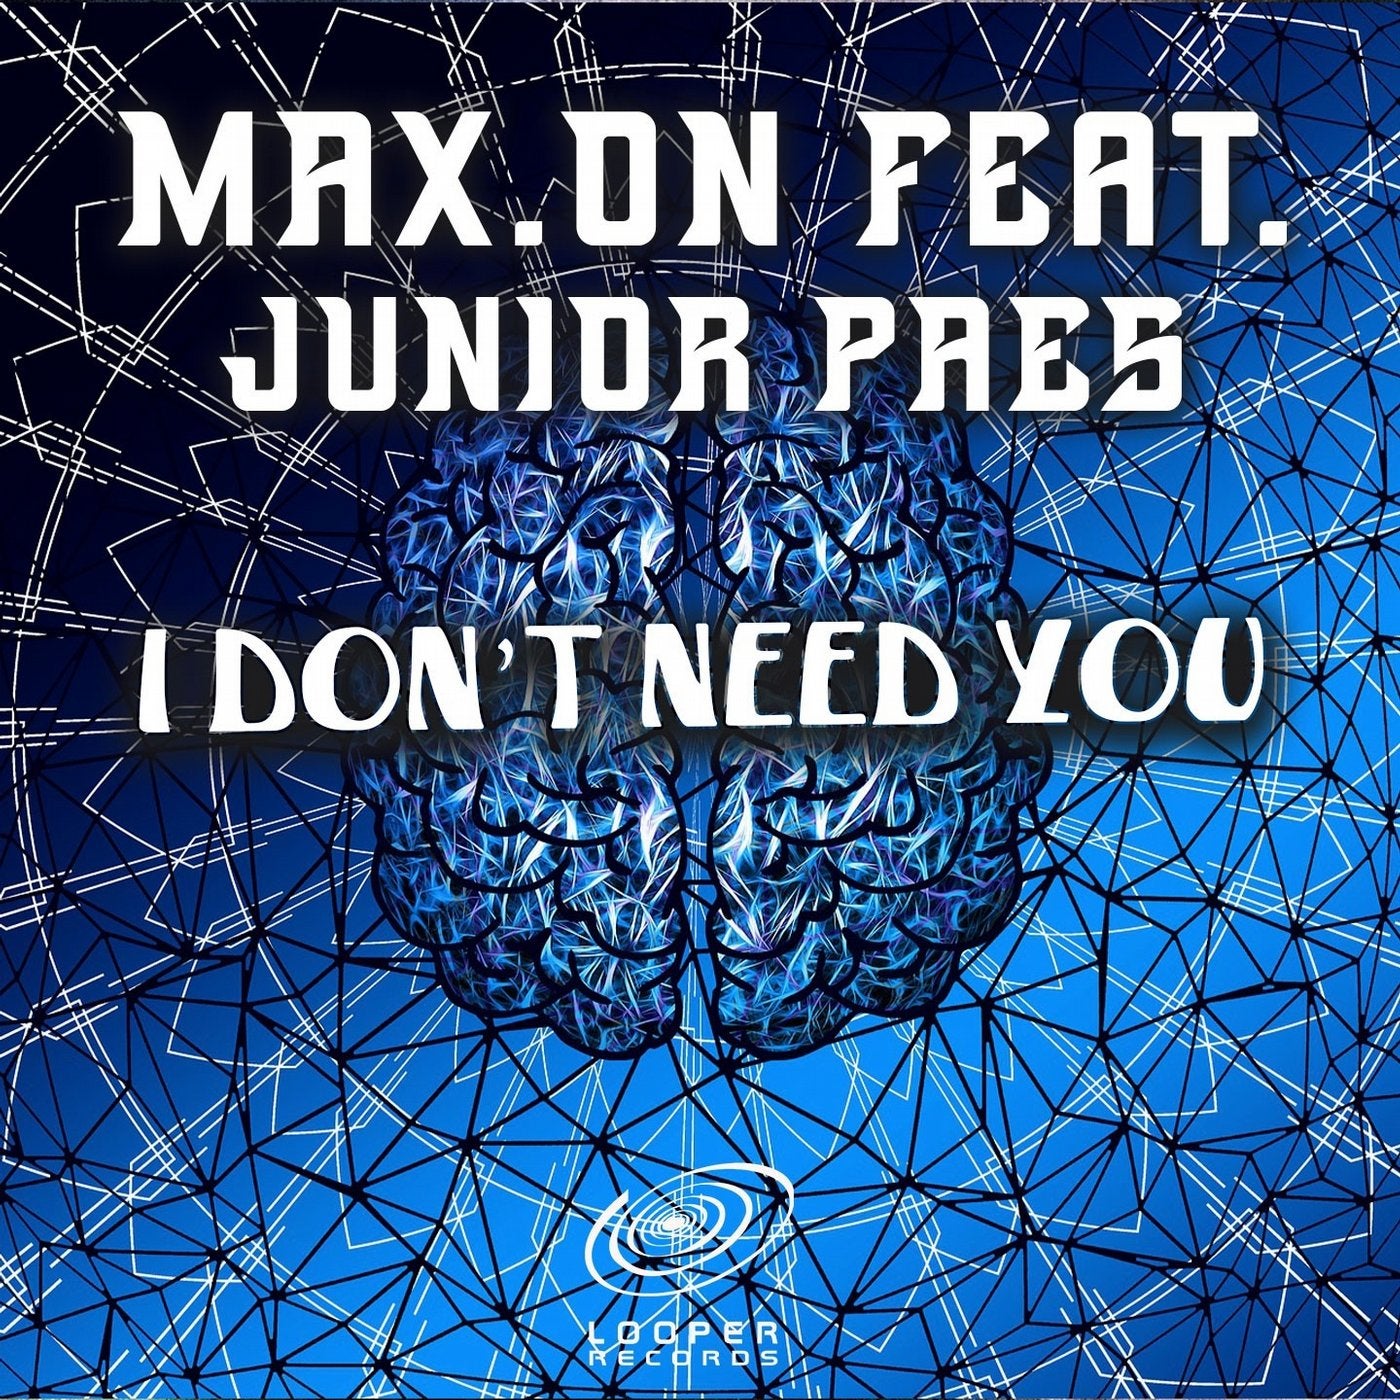 I Don't Need You (feat. Junior Paes)